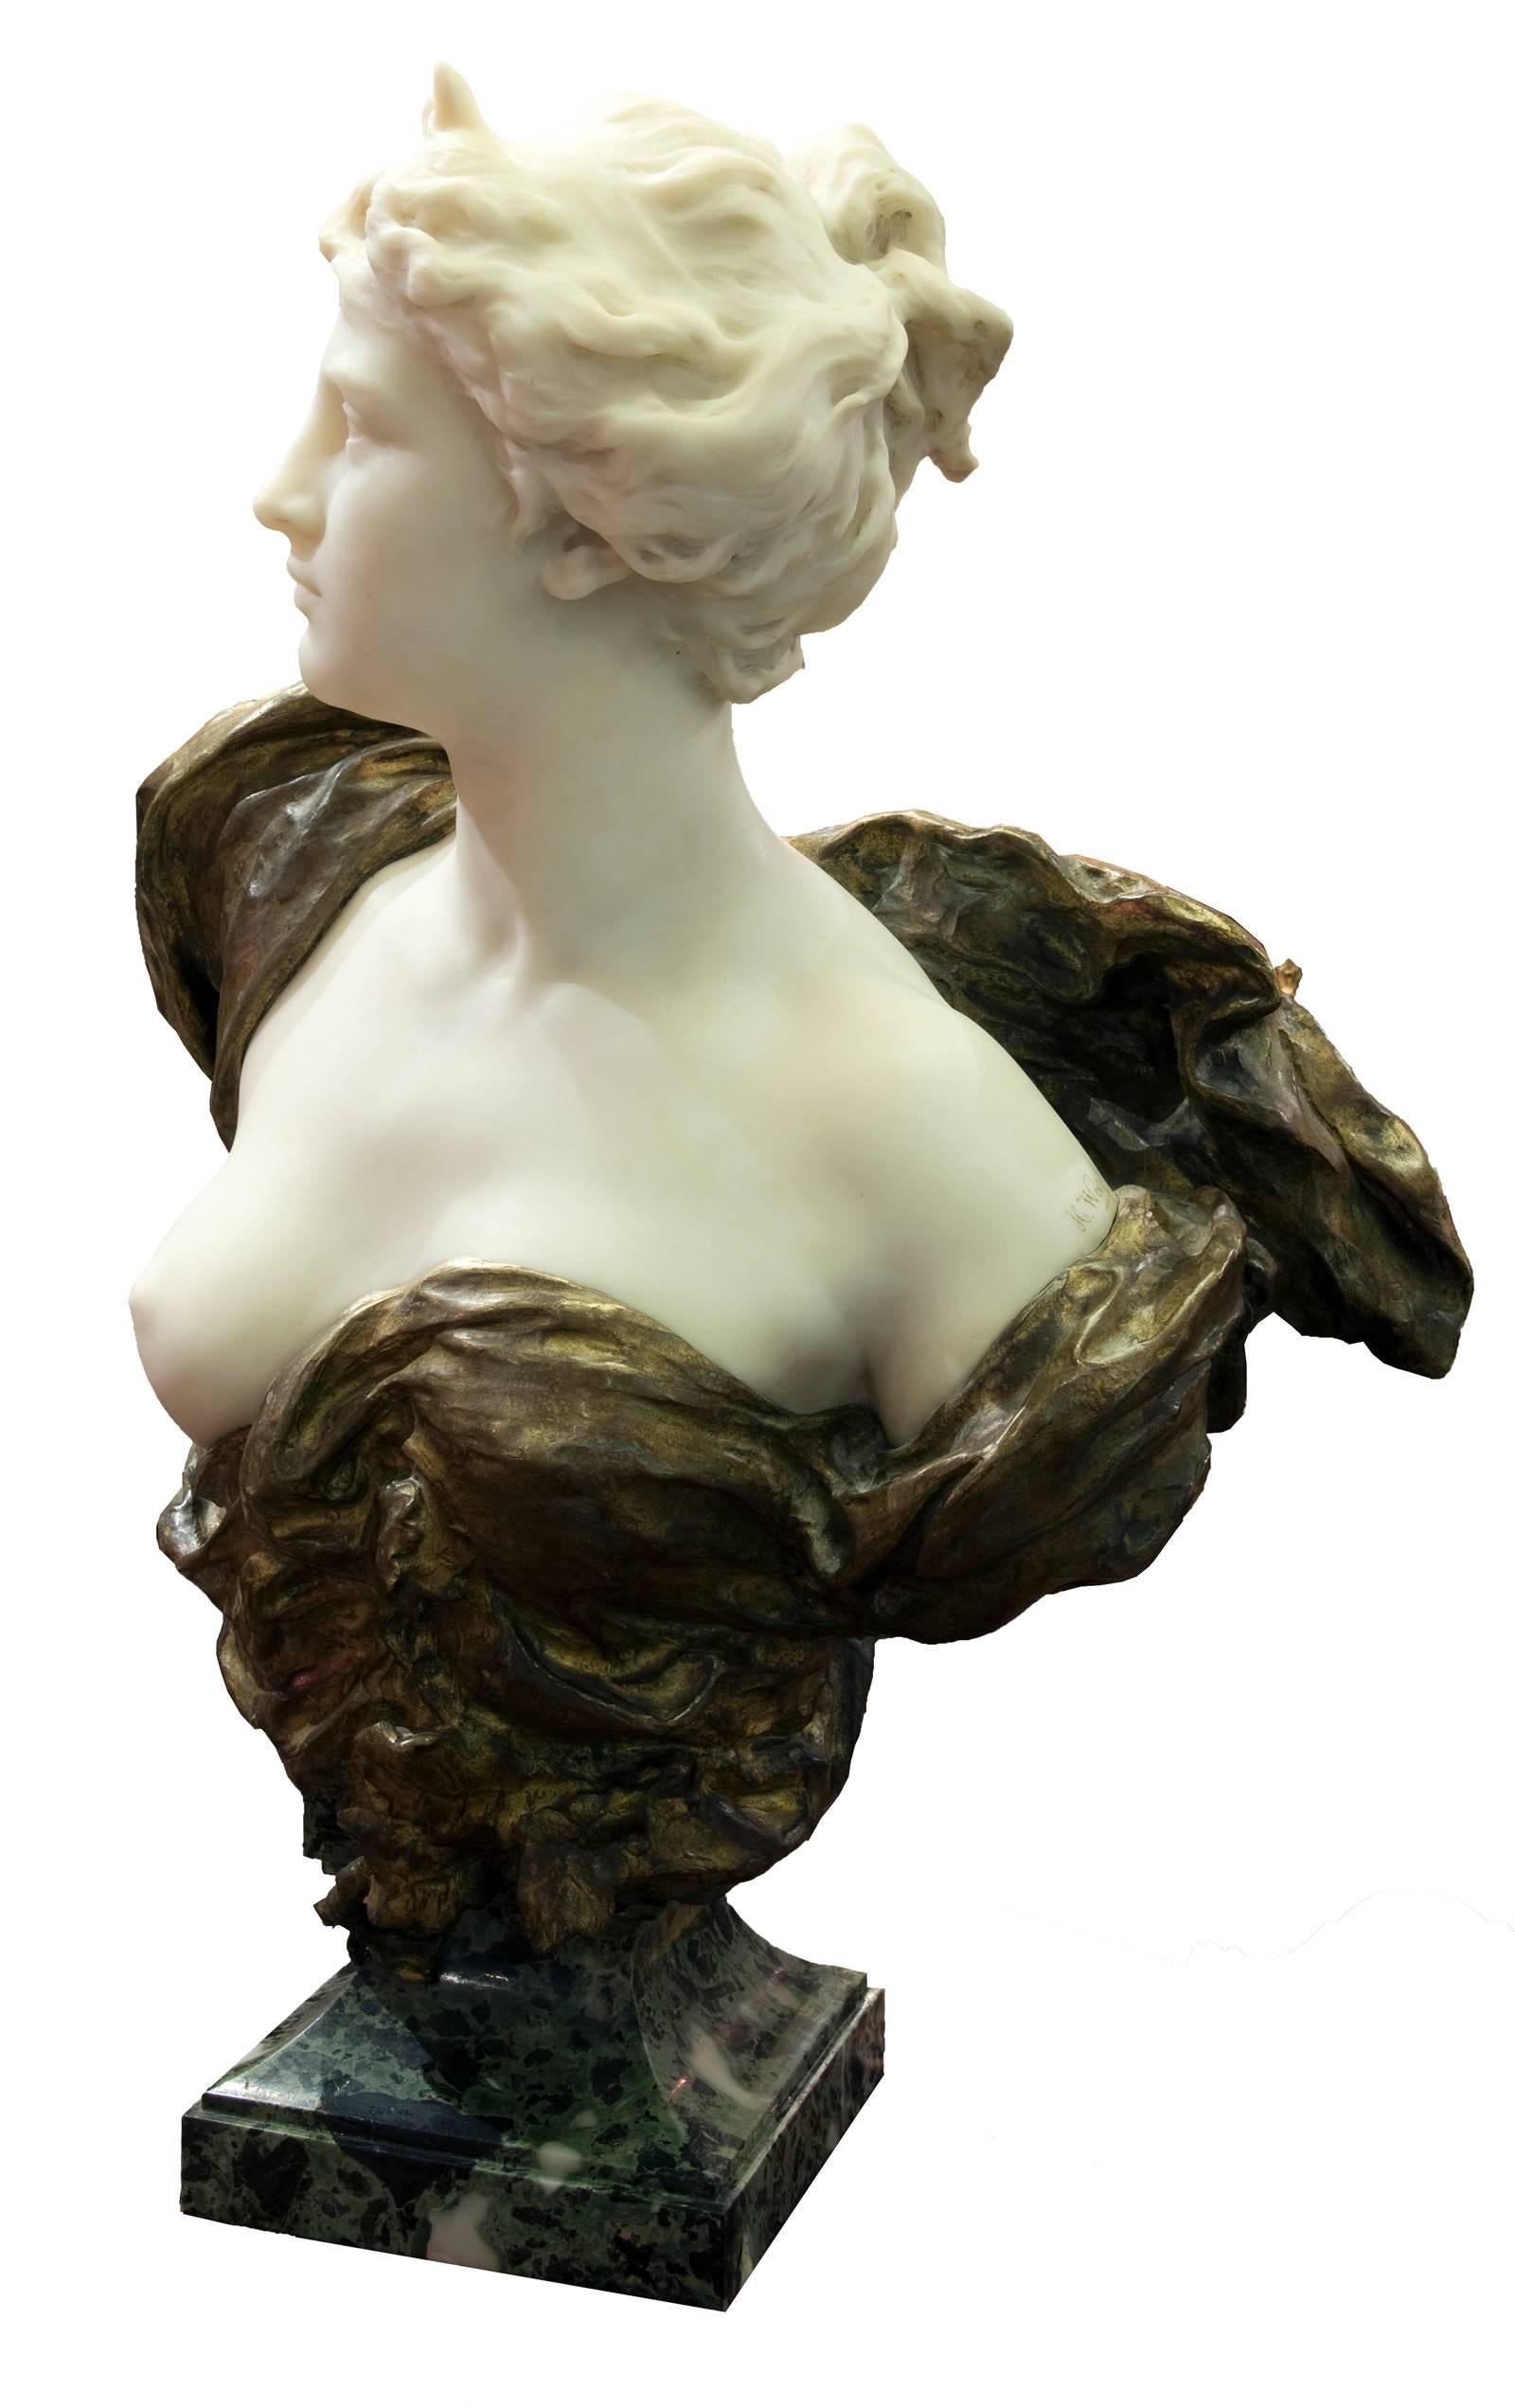 Diana, gazing stoically into the distance and depicted with the crescent moon diadem upon her head, is delicately rendered in this marble bust; the pure white marble juxtaposed against the flowing gilt bronzed drapery that wraps around her